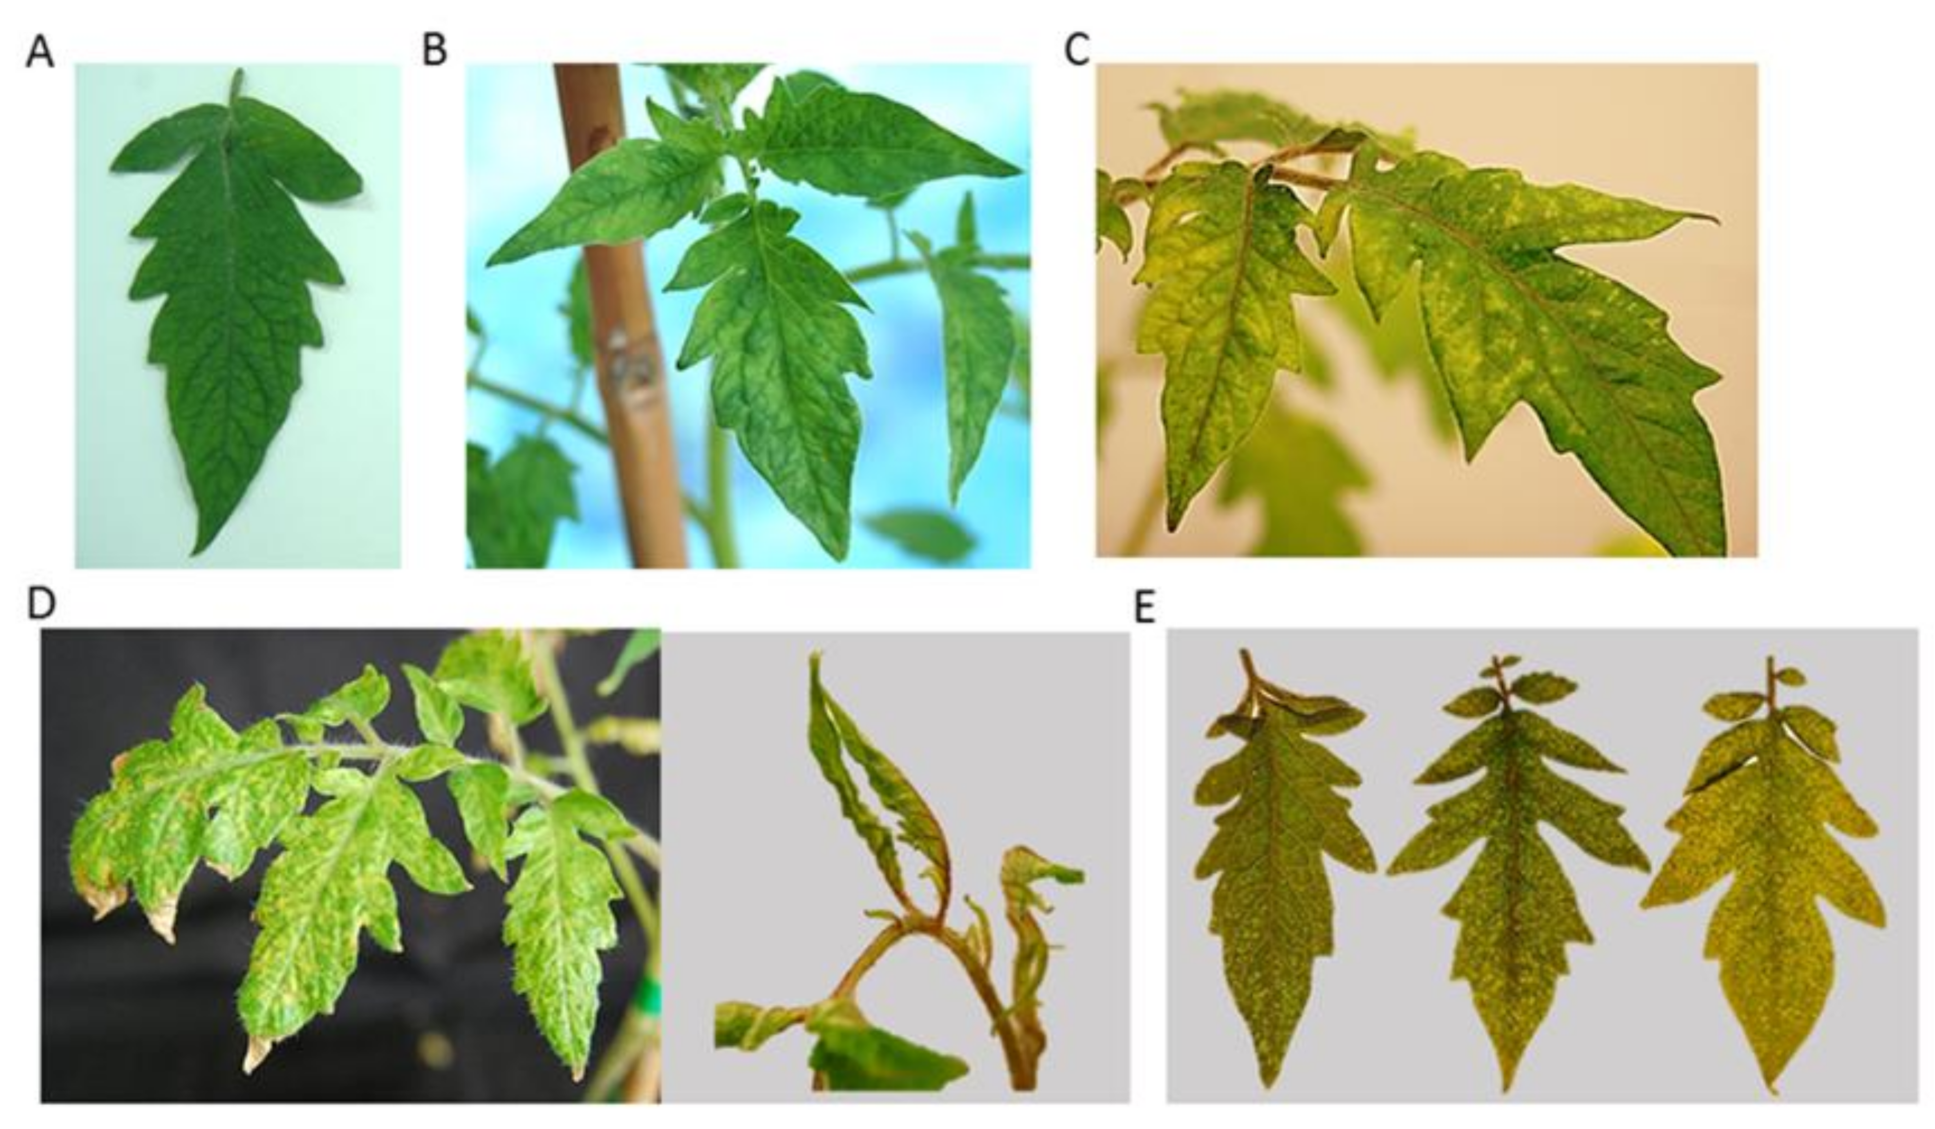 Microorganisms | Free Full-Text | Persistent Southern Tomato Virus (STV)  Interacts with Cucumber Mosaic and/or Pepino Mosaic Virus in Mixed-  Infections Modifying Plant Symptoms, Viral Titer and Small RNA Accumulation